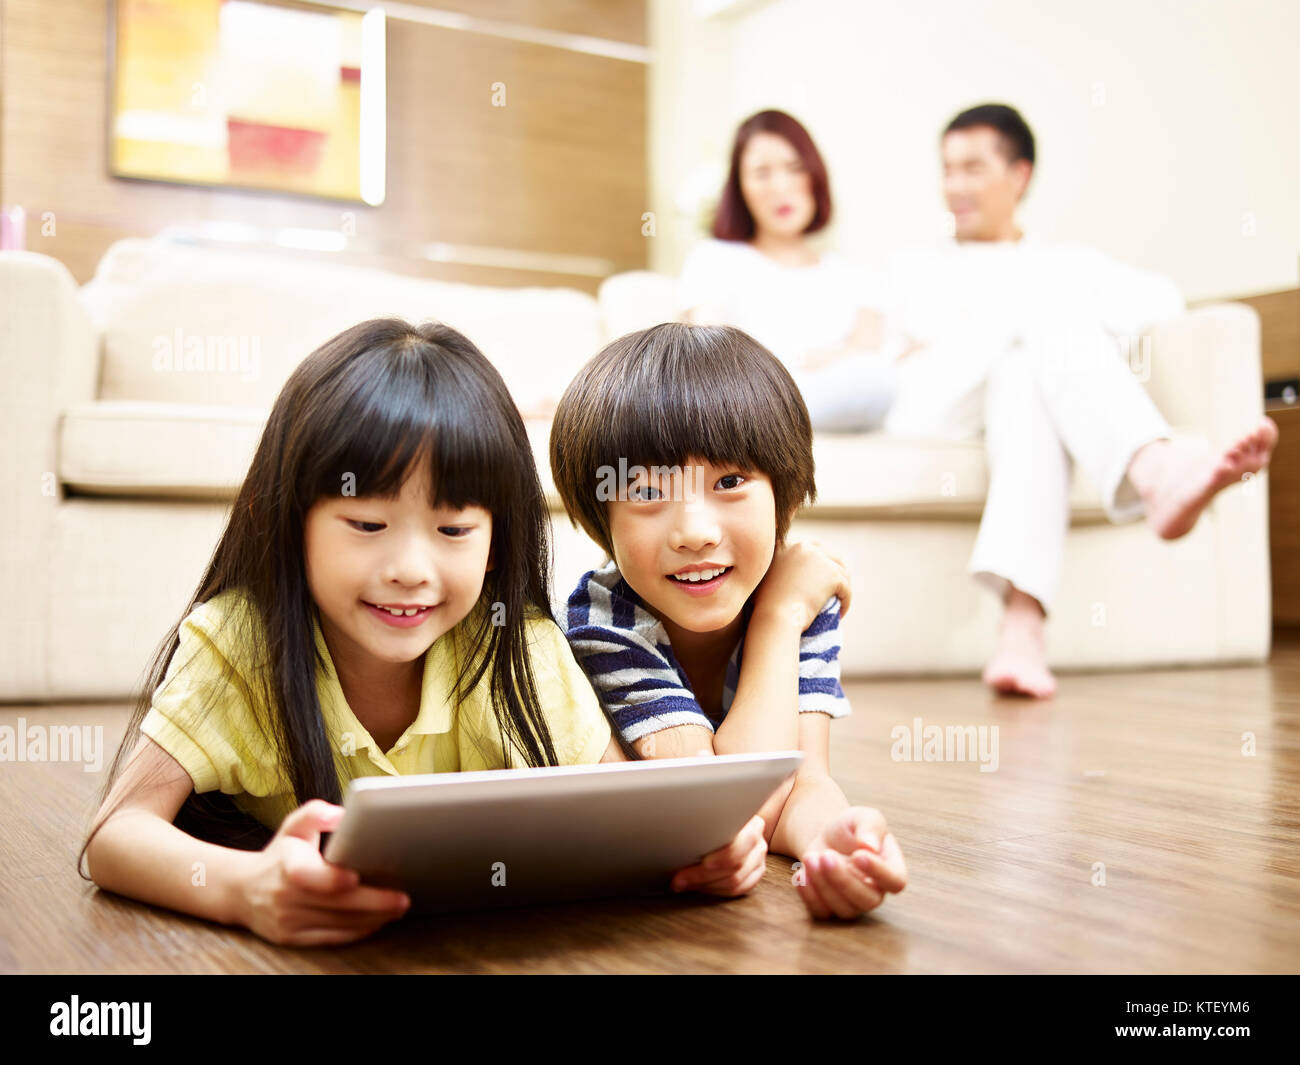 two asian children lying on floor playing video game using digital tablet while parents watching in the background. Stock Photo